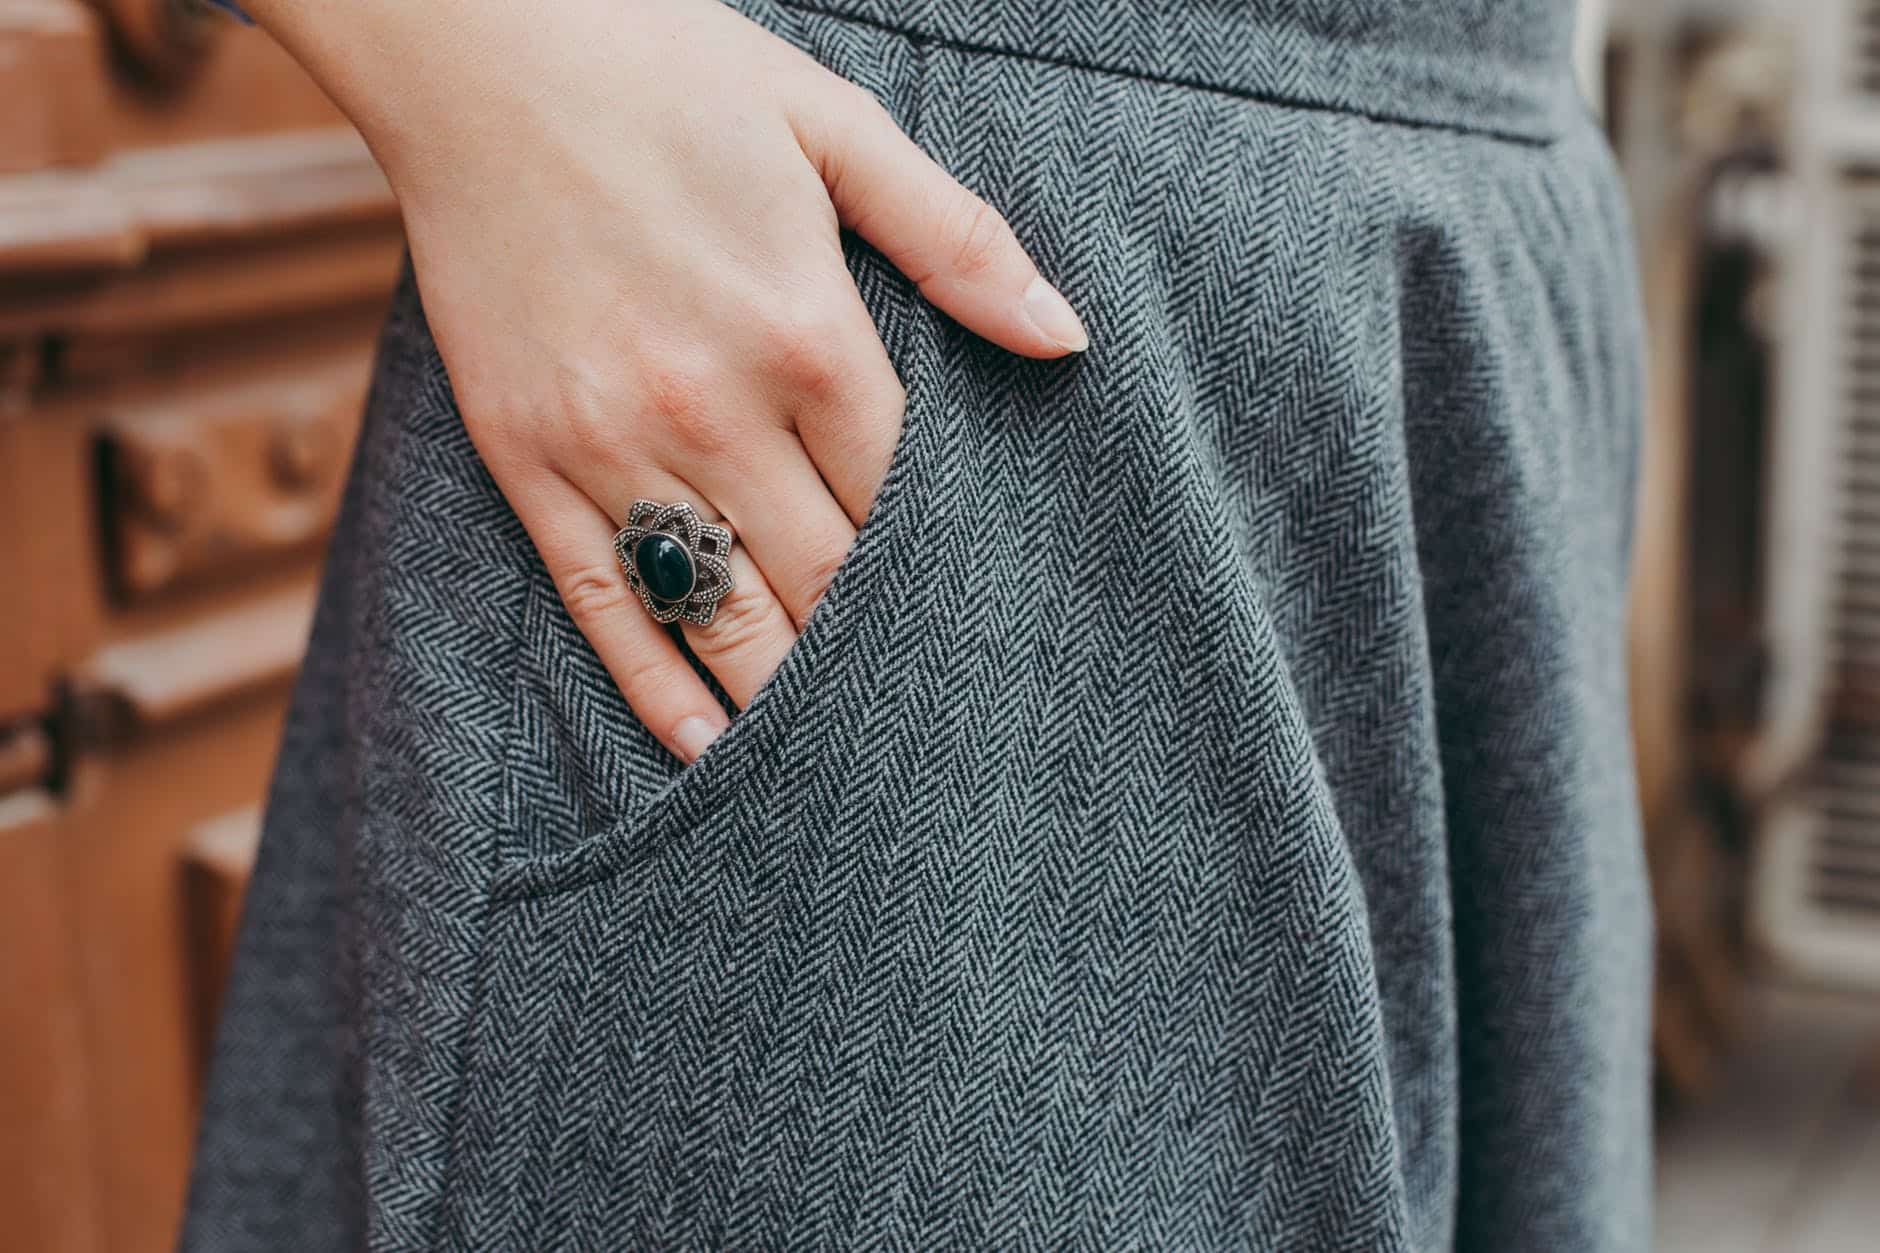 Woman's ringed hand in smart grey trouser pocket